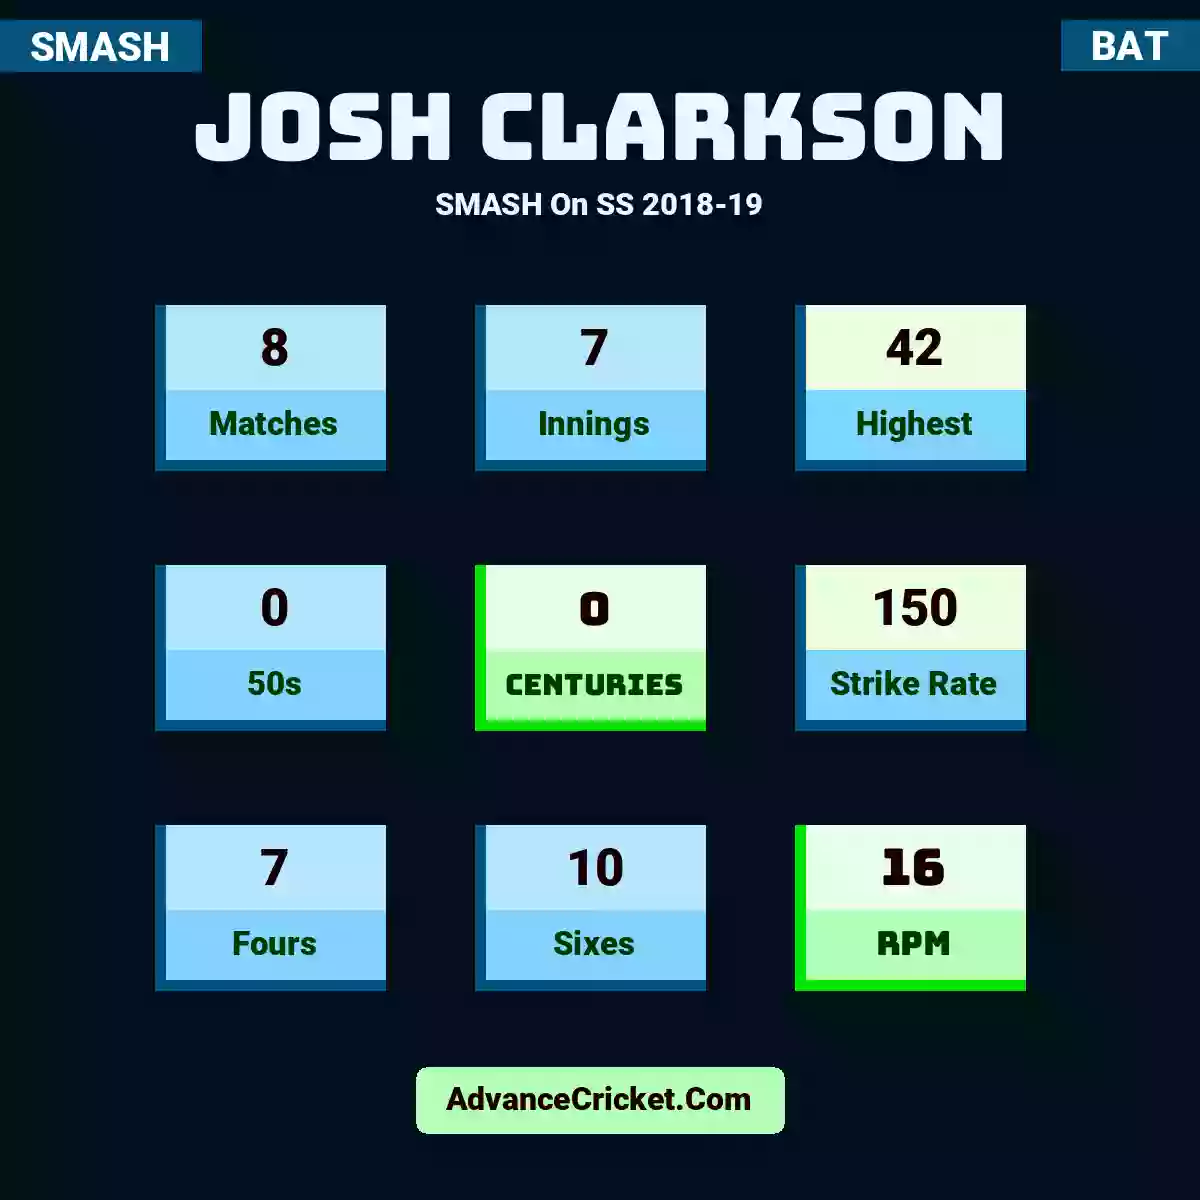 Josh Clarkson SMASH  On SS 2018-19, Josh Clarkson played 8 matches, scored 42 runs as highest, 0 half-centuries, and 0 centuries, with a strike rate of 150. J.Clarkson hit 7 fours and 10 sixes, with an RPM of 16.